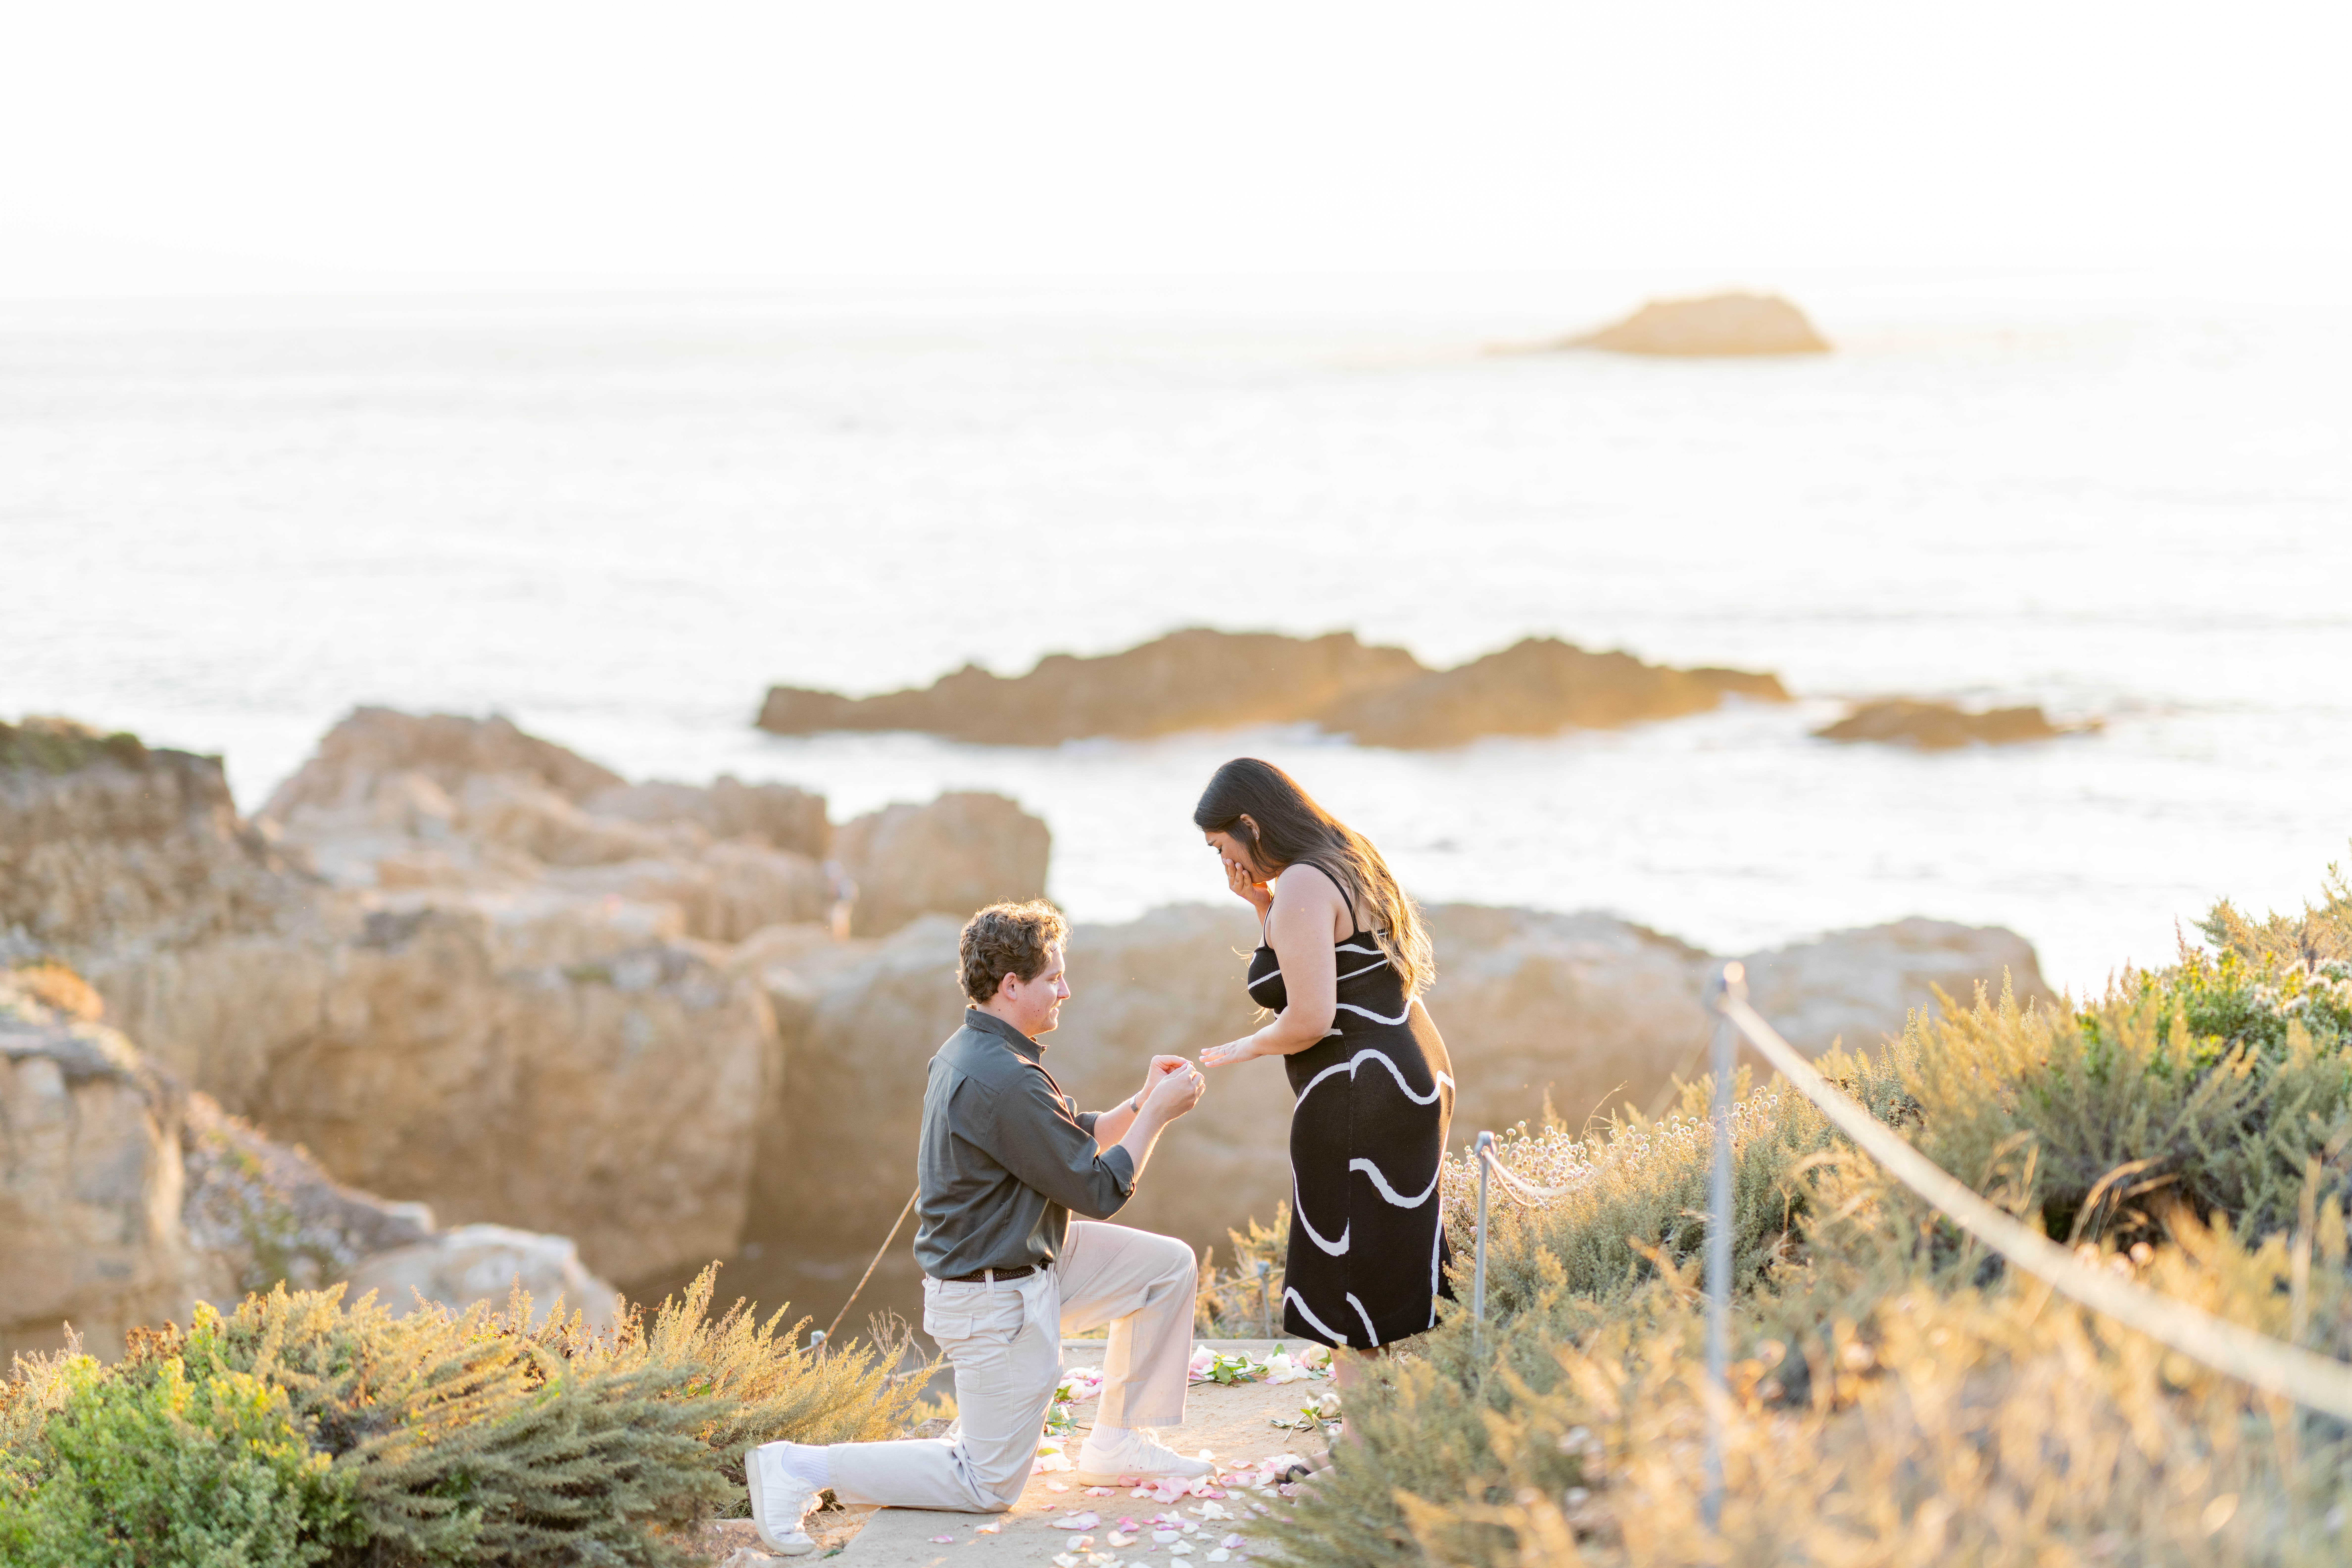 landscape image of young man down on one knee proposing to his girlfriend who is standing - he is sliding the ring on her finger right after she said yes